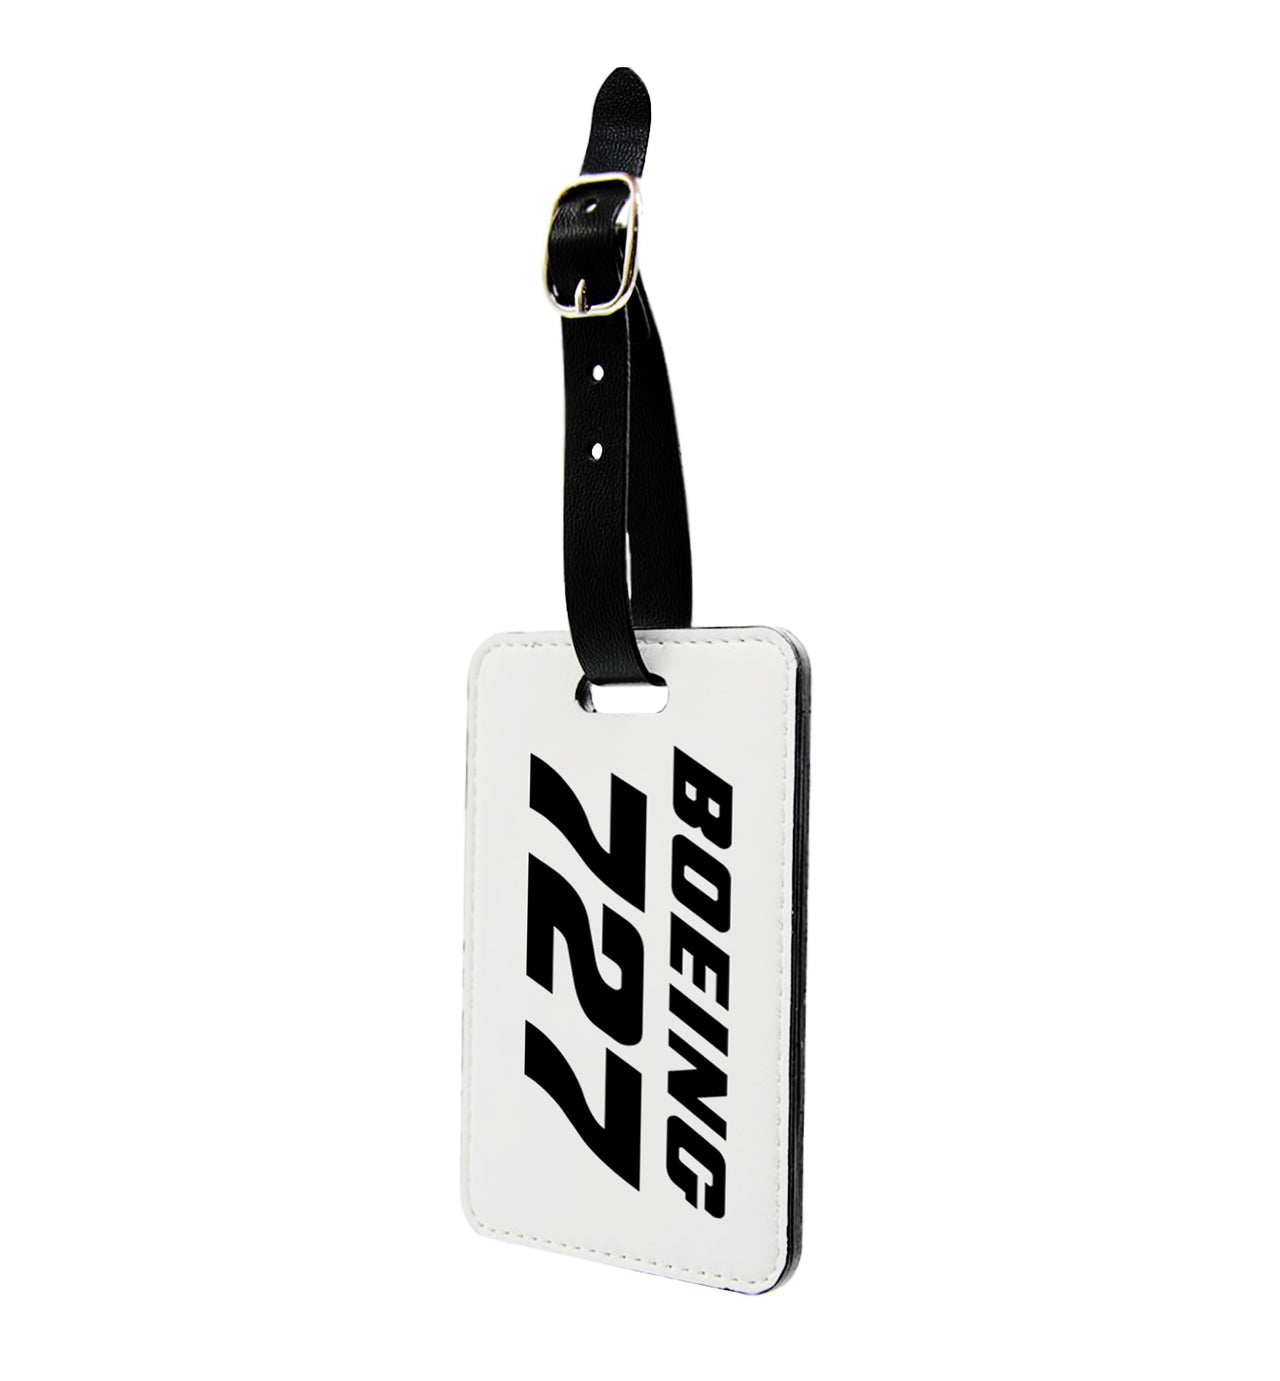 Boeing 727 & Text Designed Luggage Tag